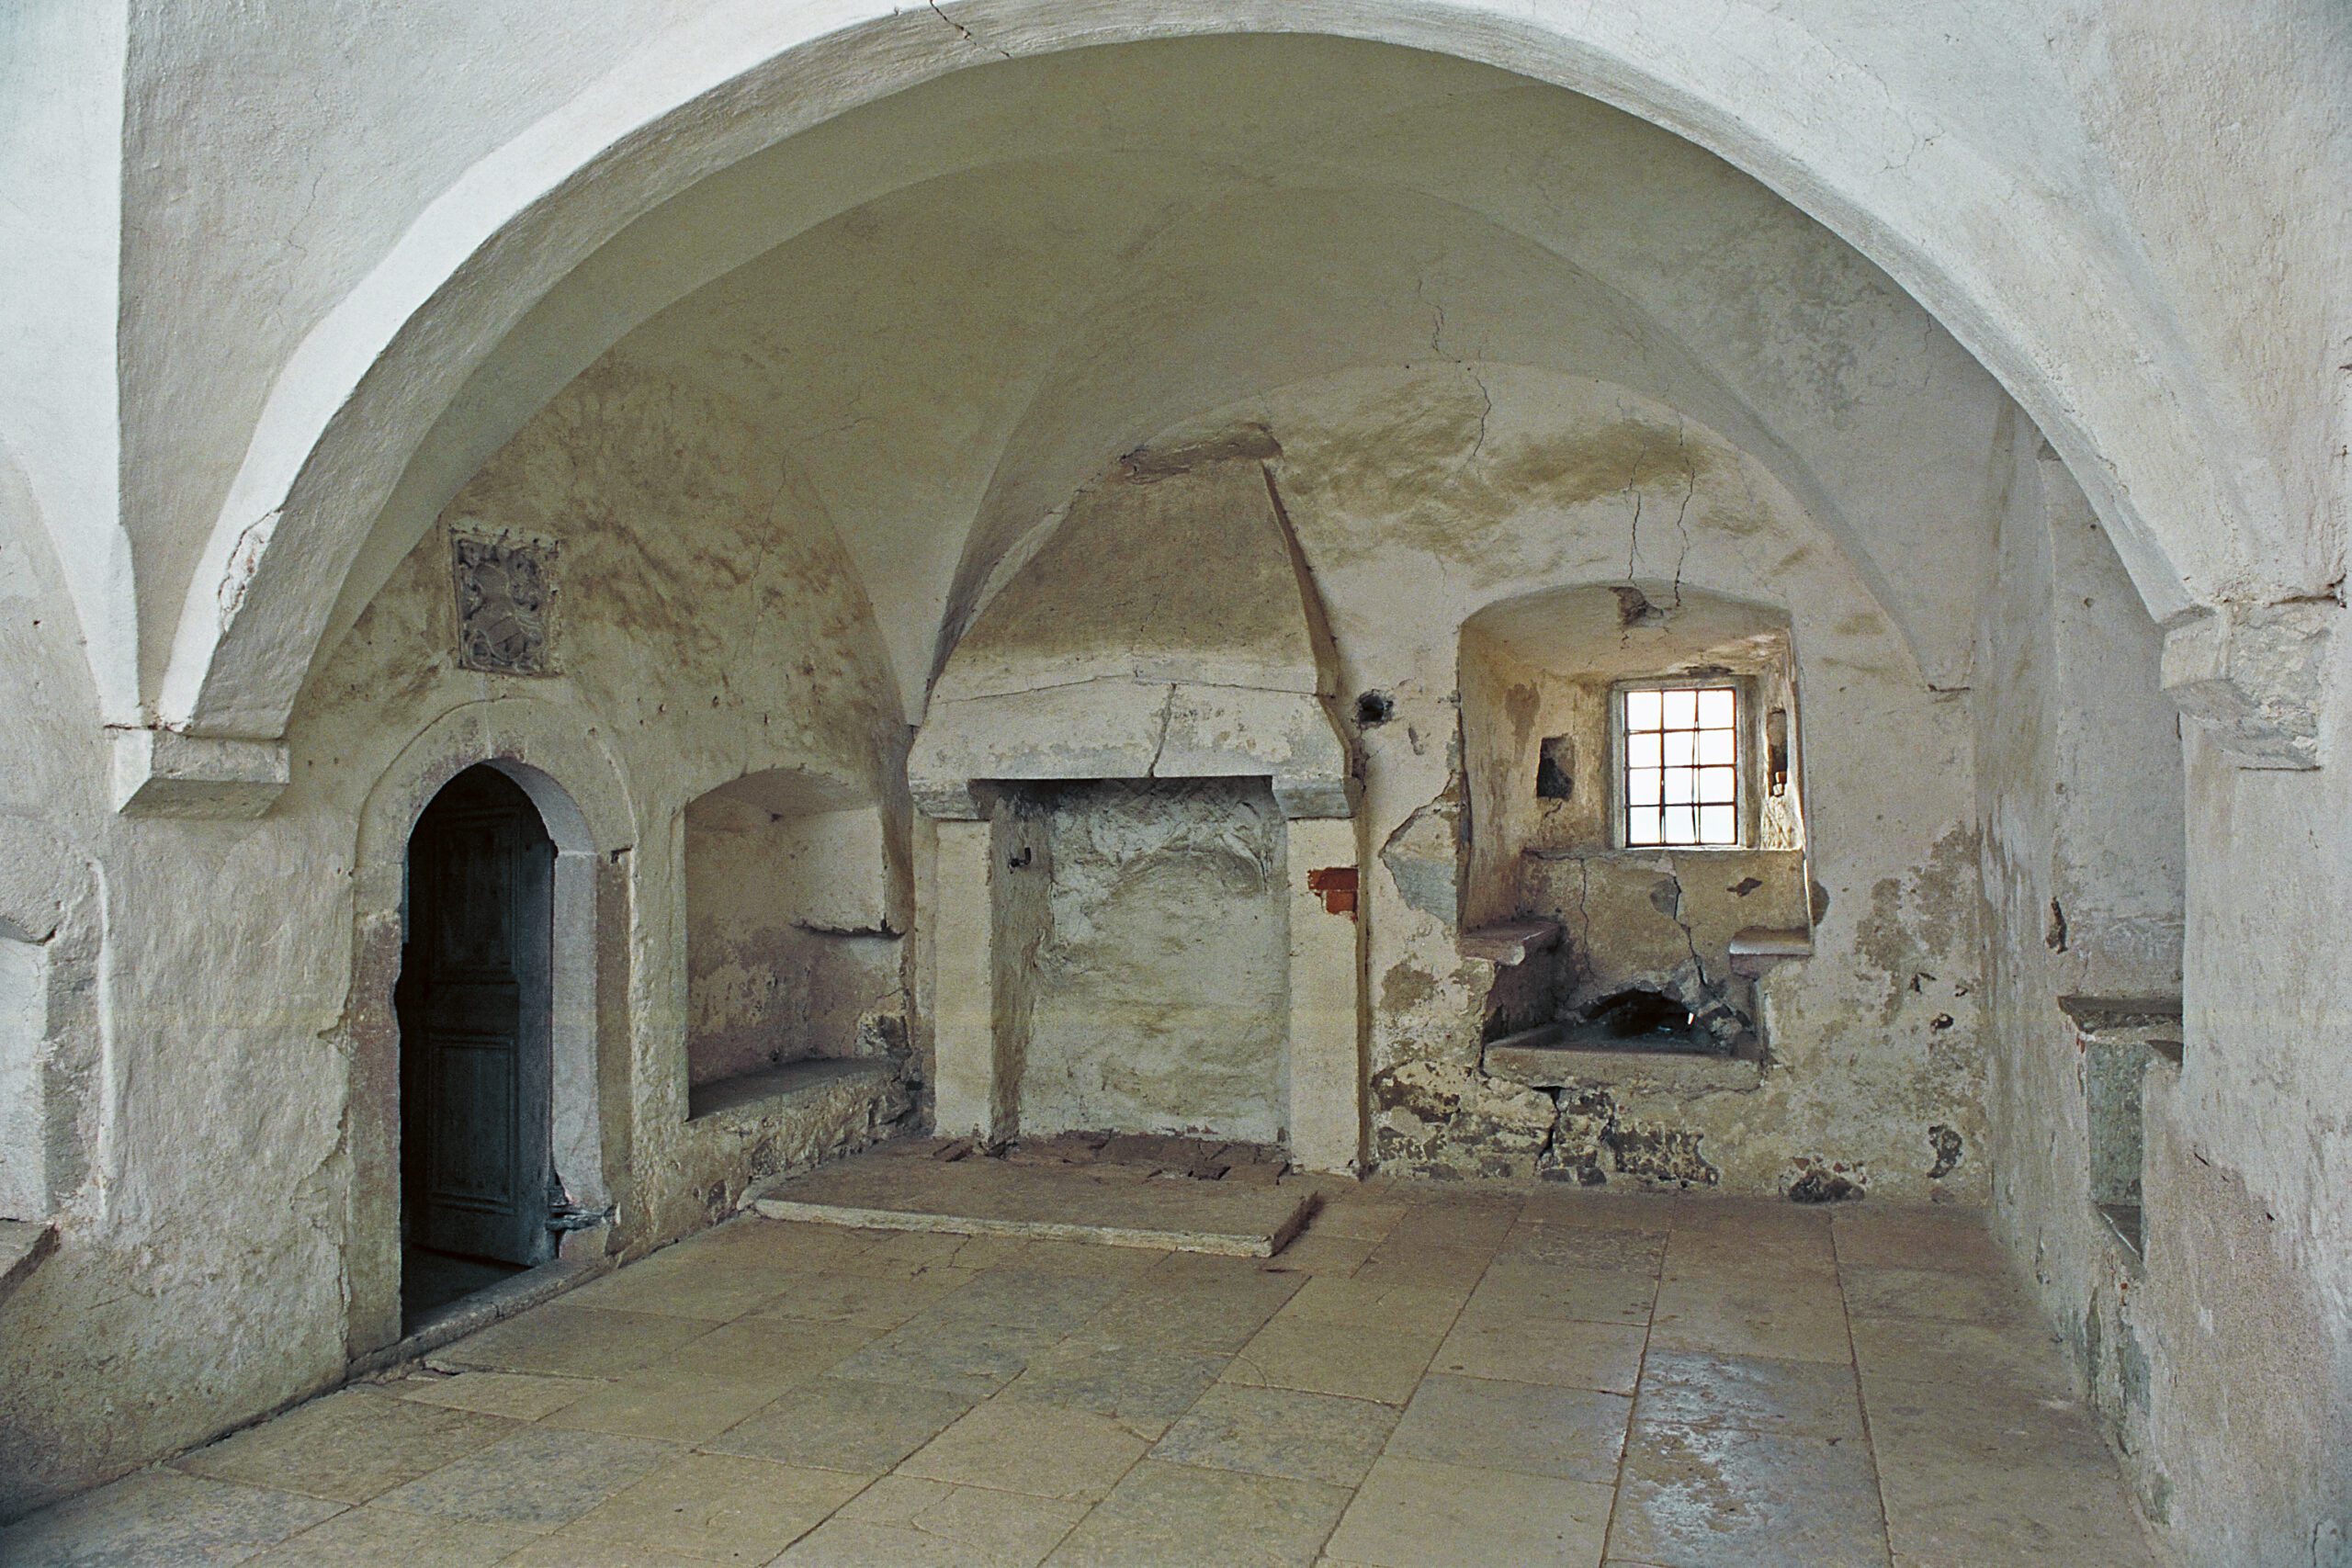 The picture shows a medieval room in the castle built entirely of stone. In the center is a stove, to the left a portal and to the right a window niche with seating.